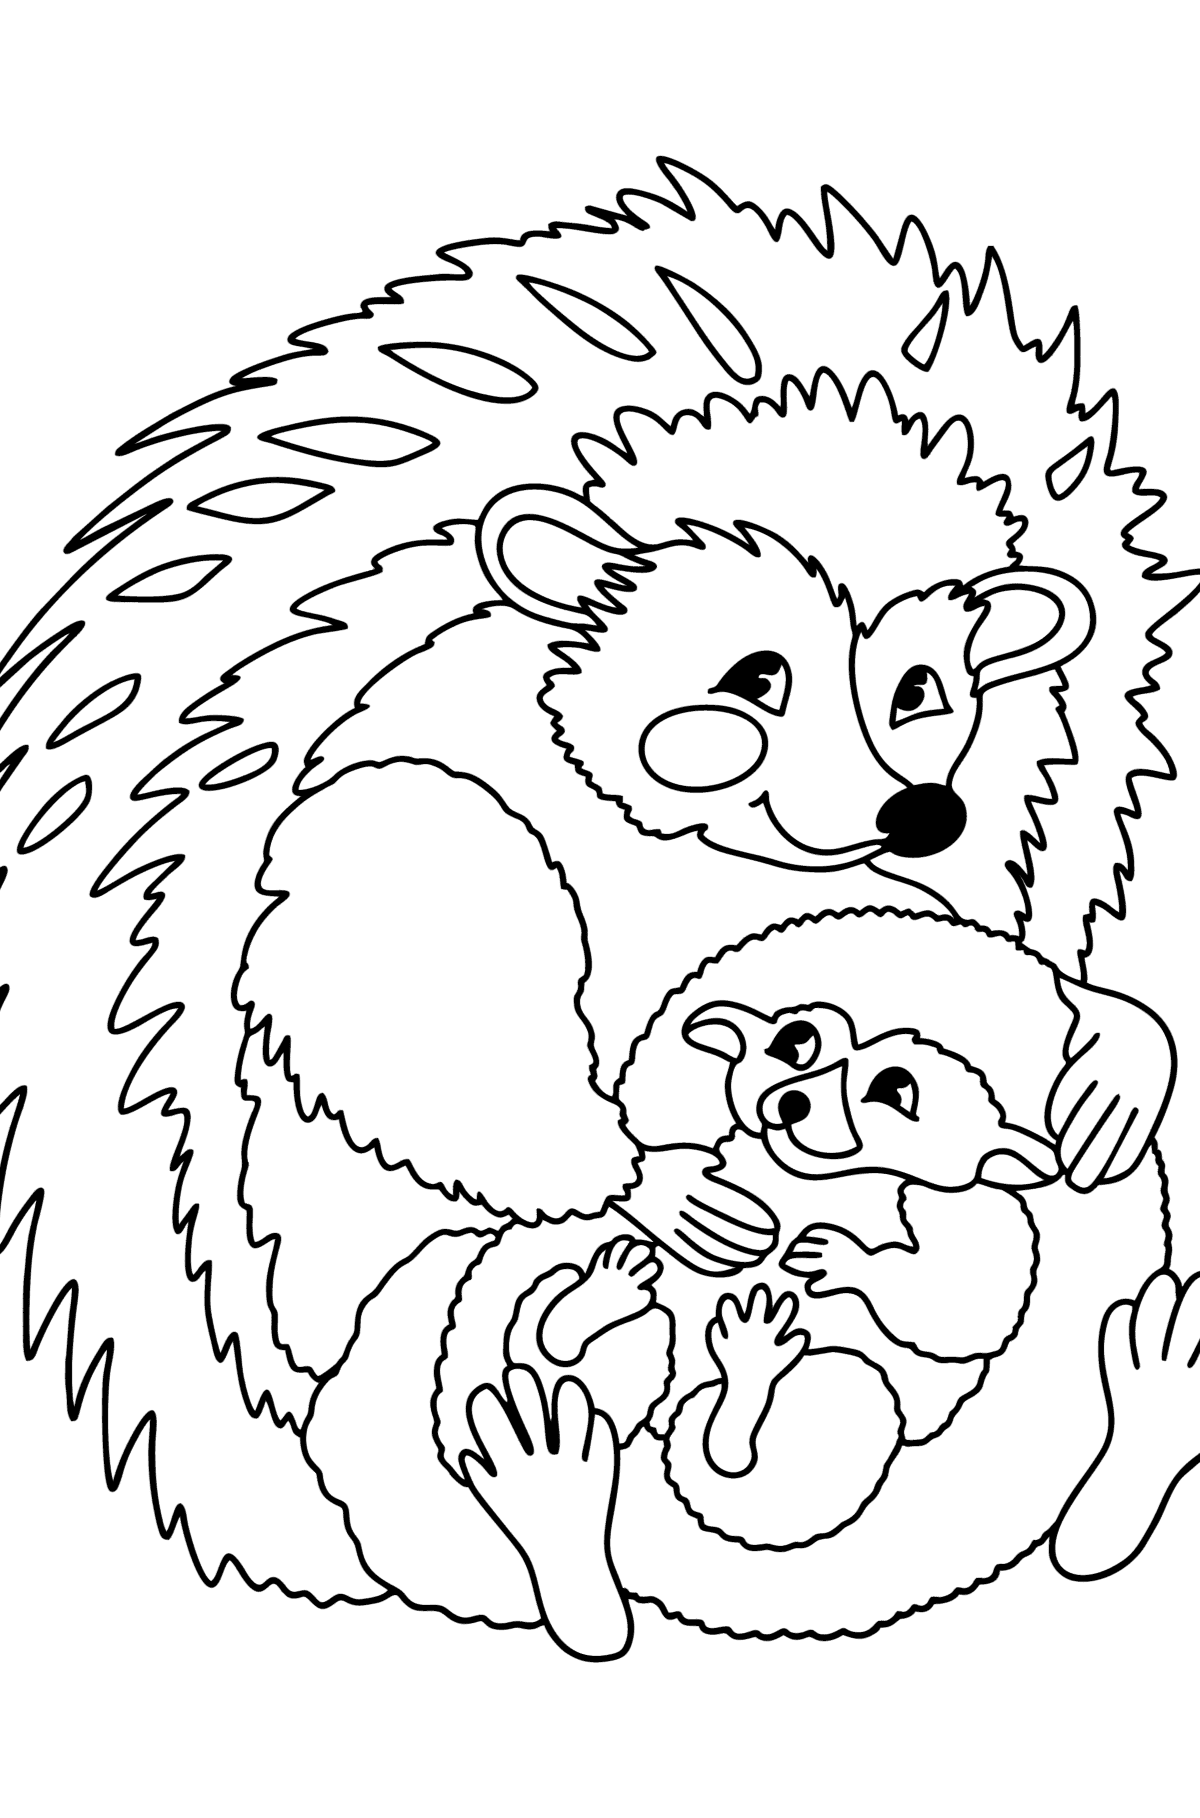 Hedgehog with baby сoloring page - Coloring Pages for Kids